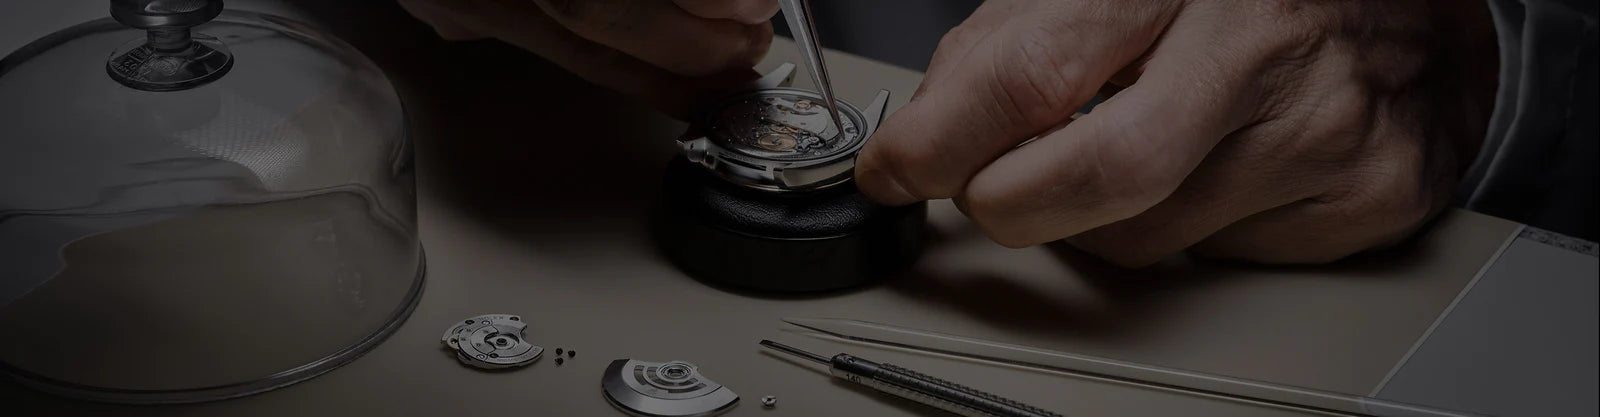 Servicing Your Rolex at Shreve & Co. in Palo Alto, CA